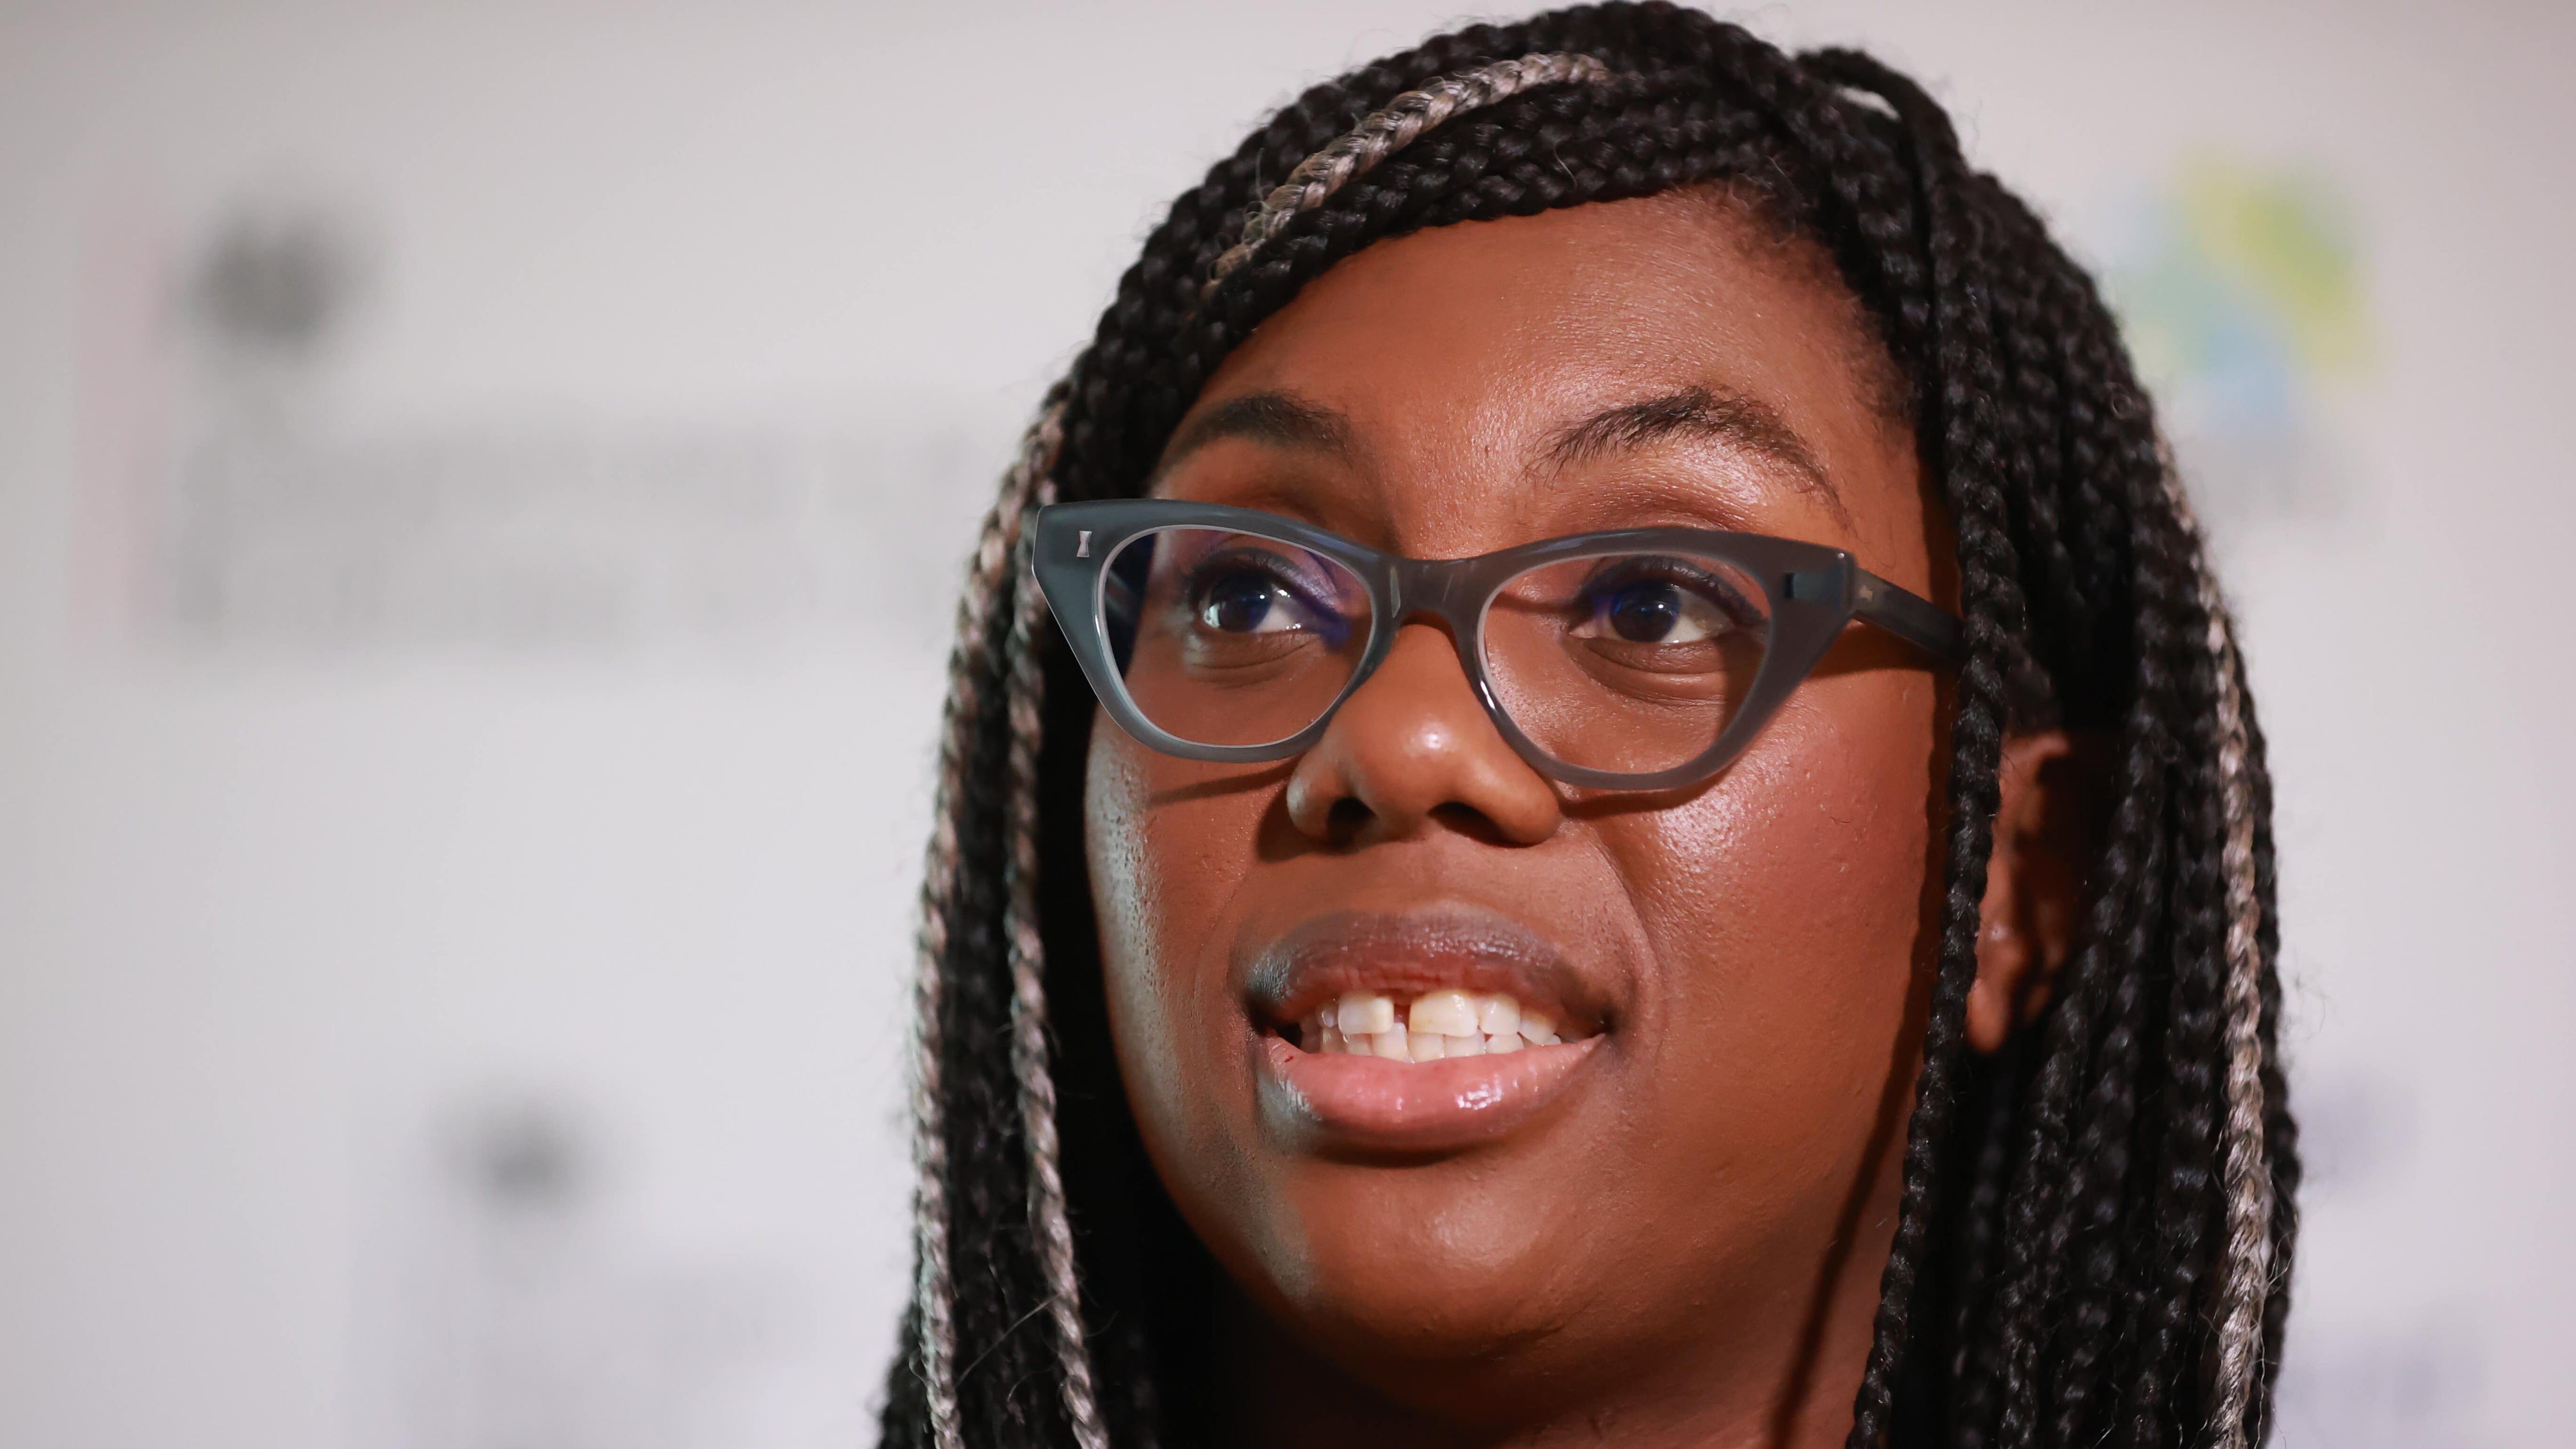 Equalities minister Kemi Badenoch announced an update on gender recognition in Parliament (Liam McBurney/PA)